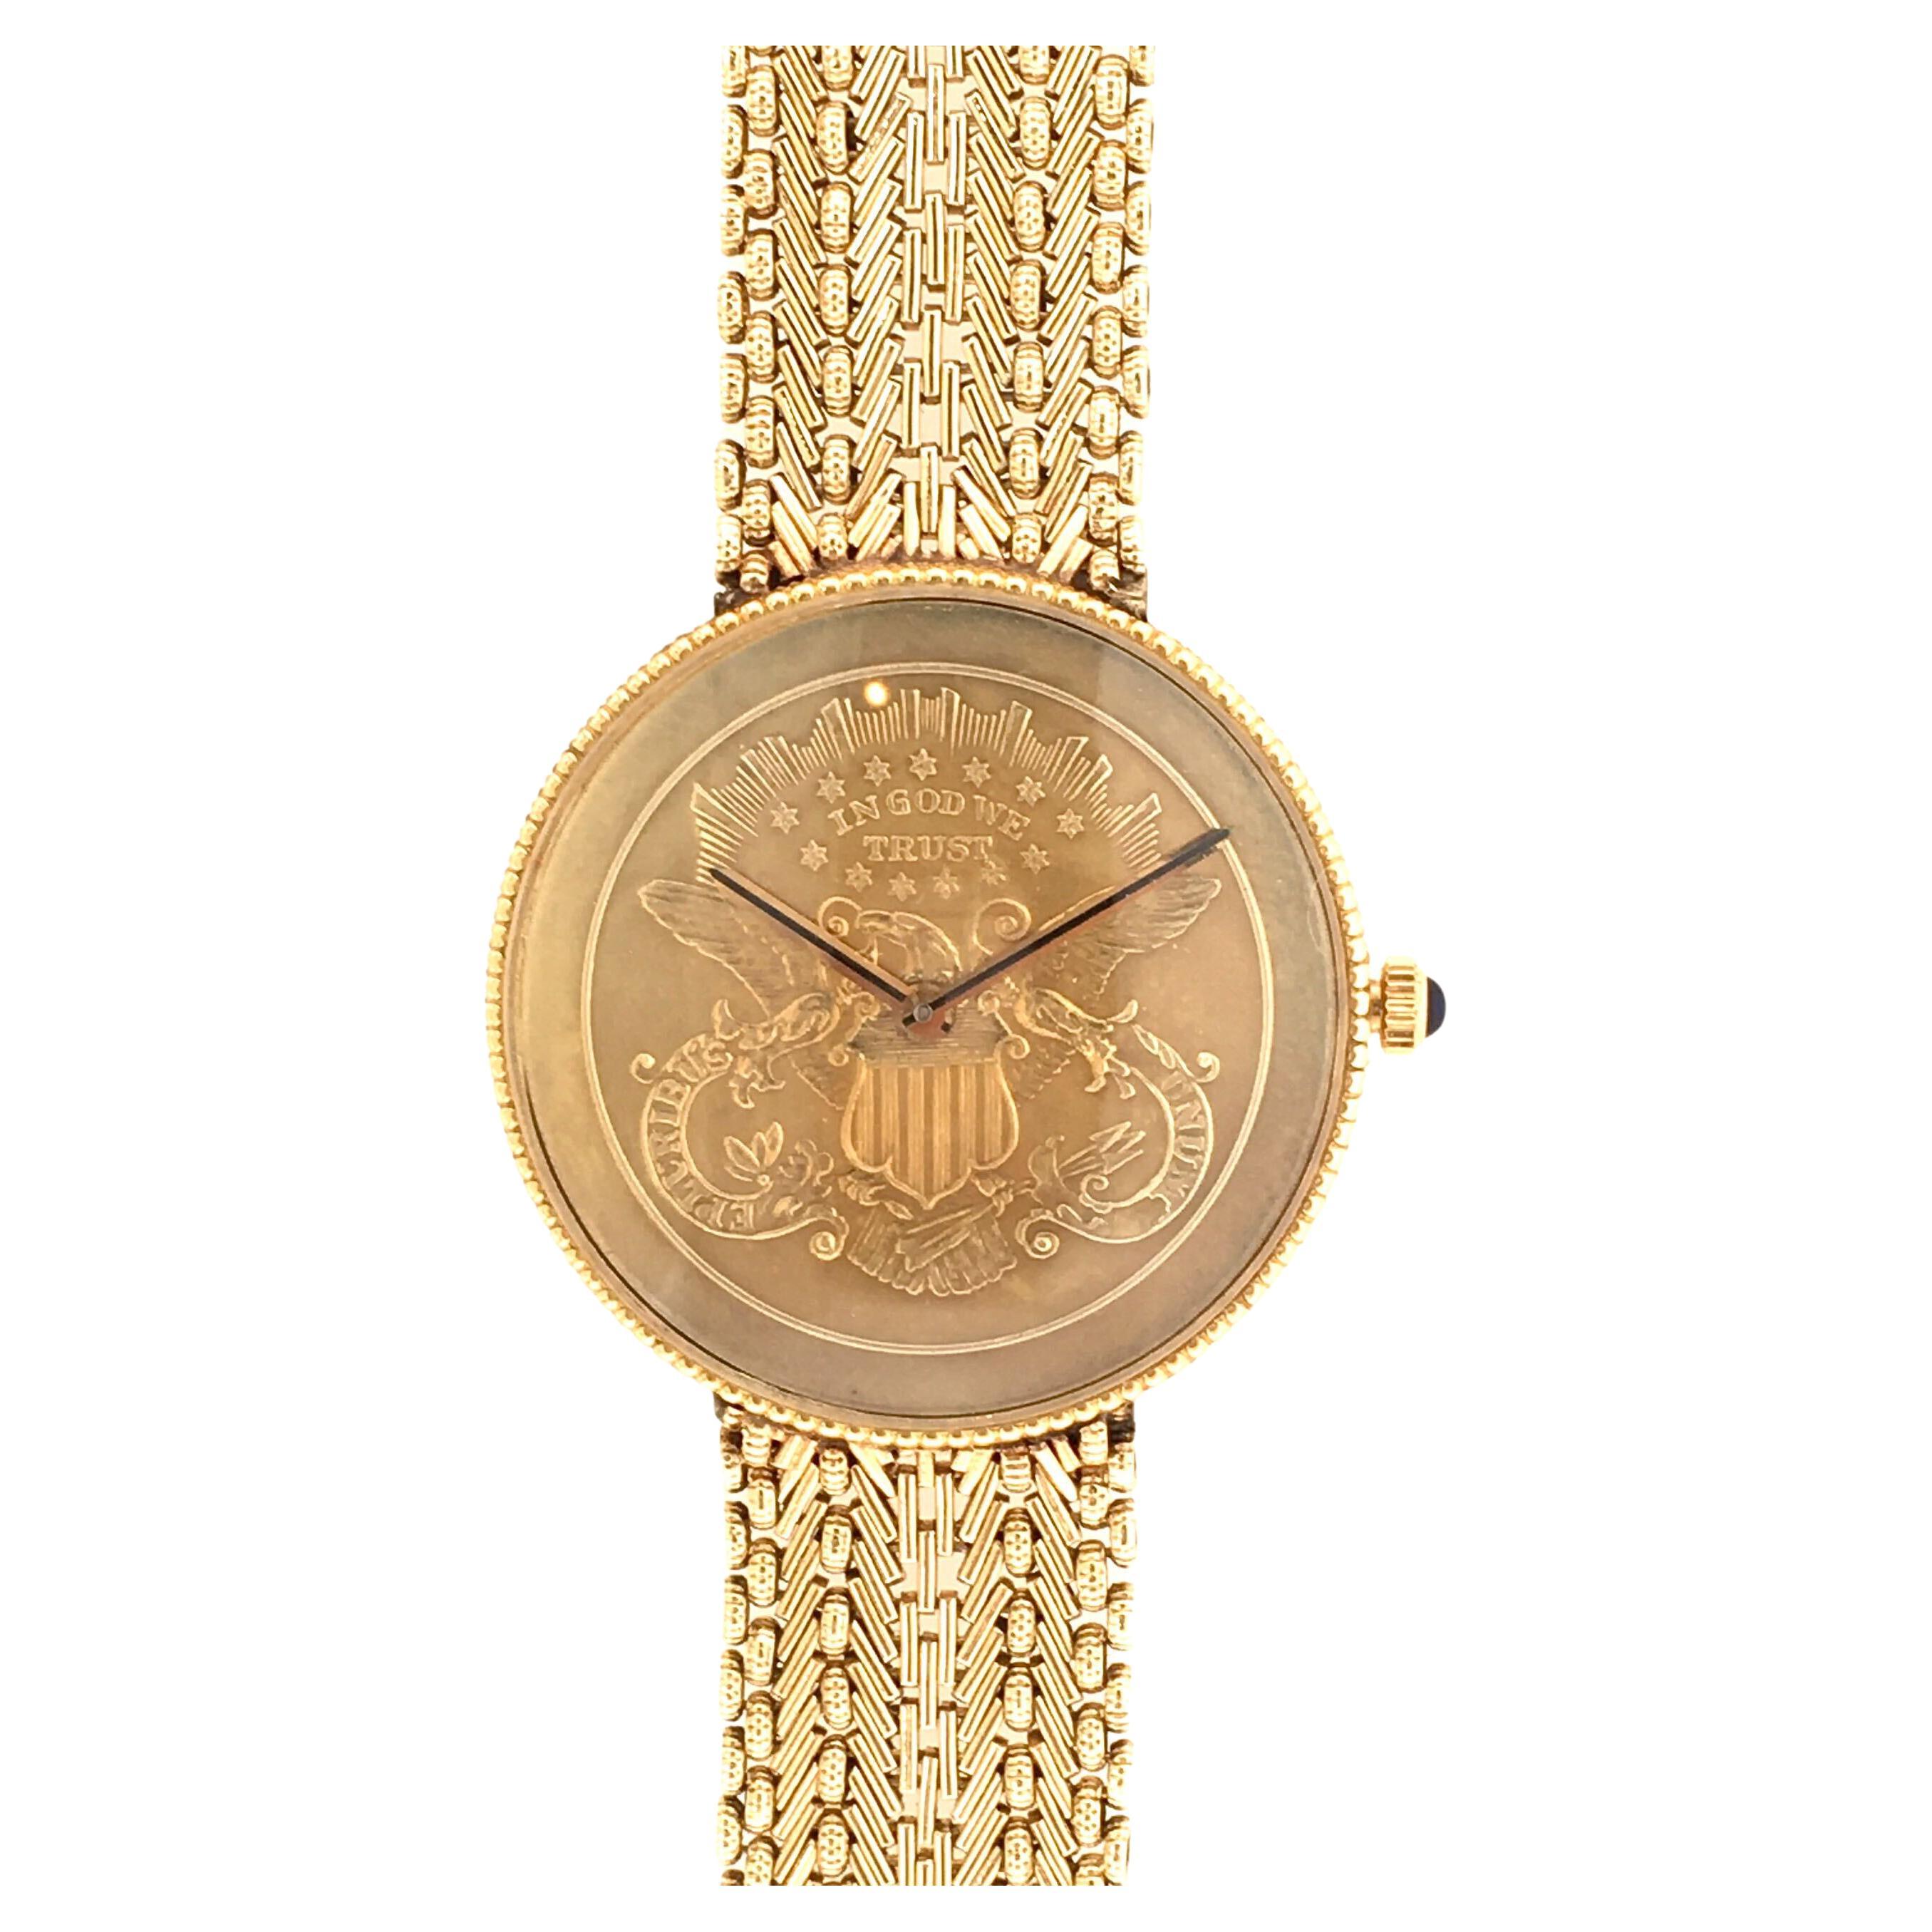 Antique 22k Gold Watches - 5 For Sale at 1stDibs | 22k gold watches ...